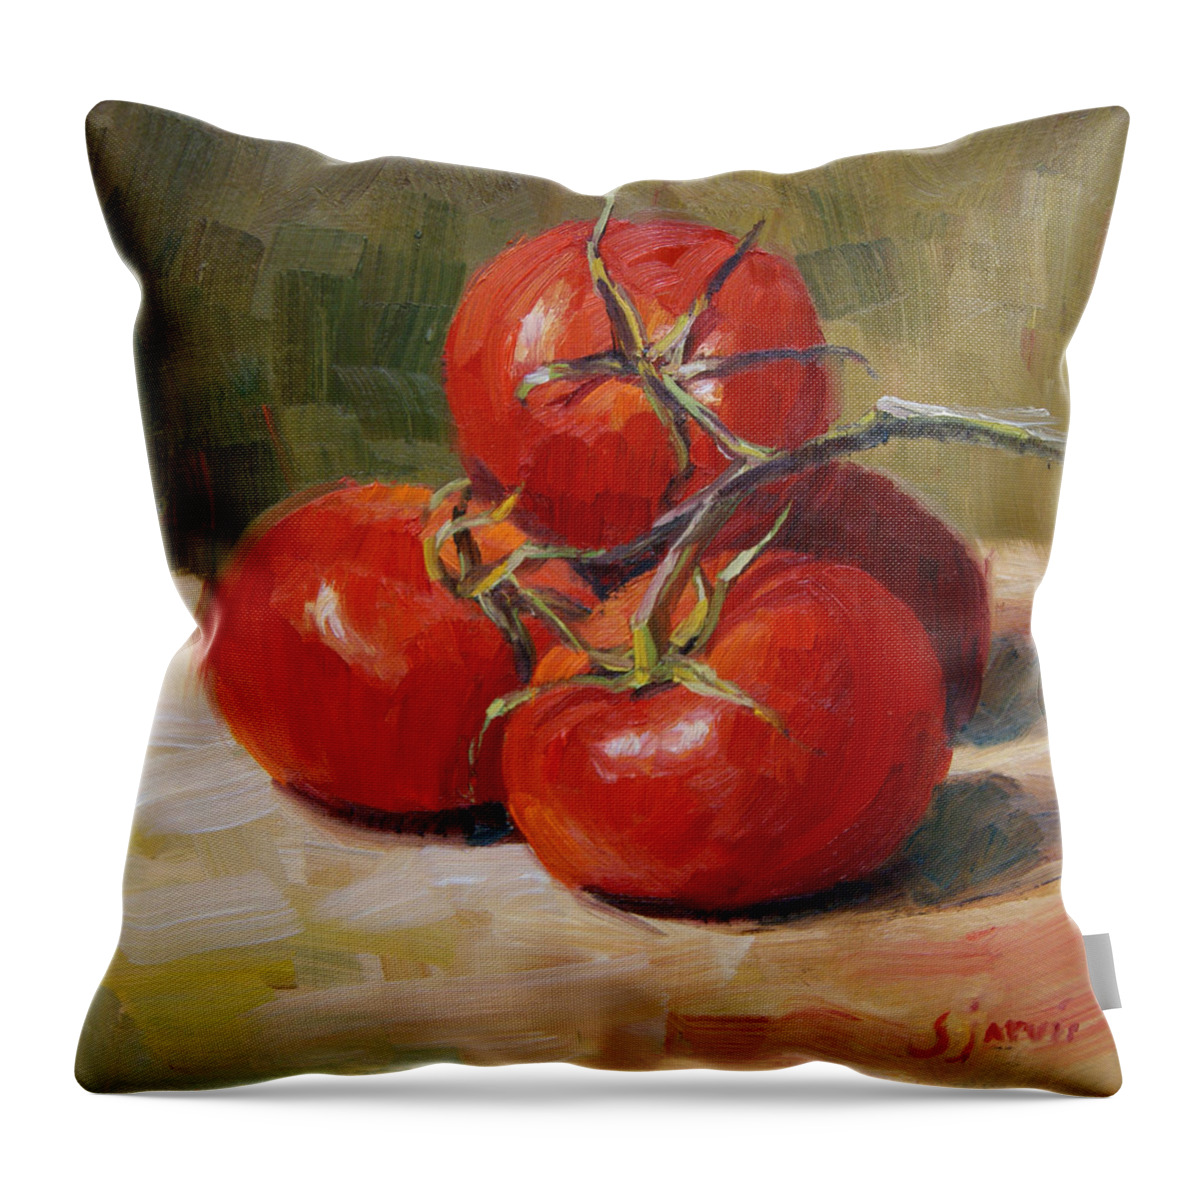 Vegetable Throw Pillow featuring the painting Red Was Her Favorite Color by Susan N Jarvis